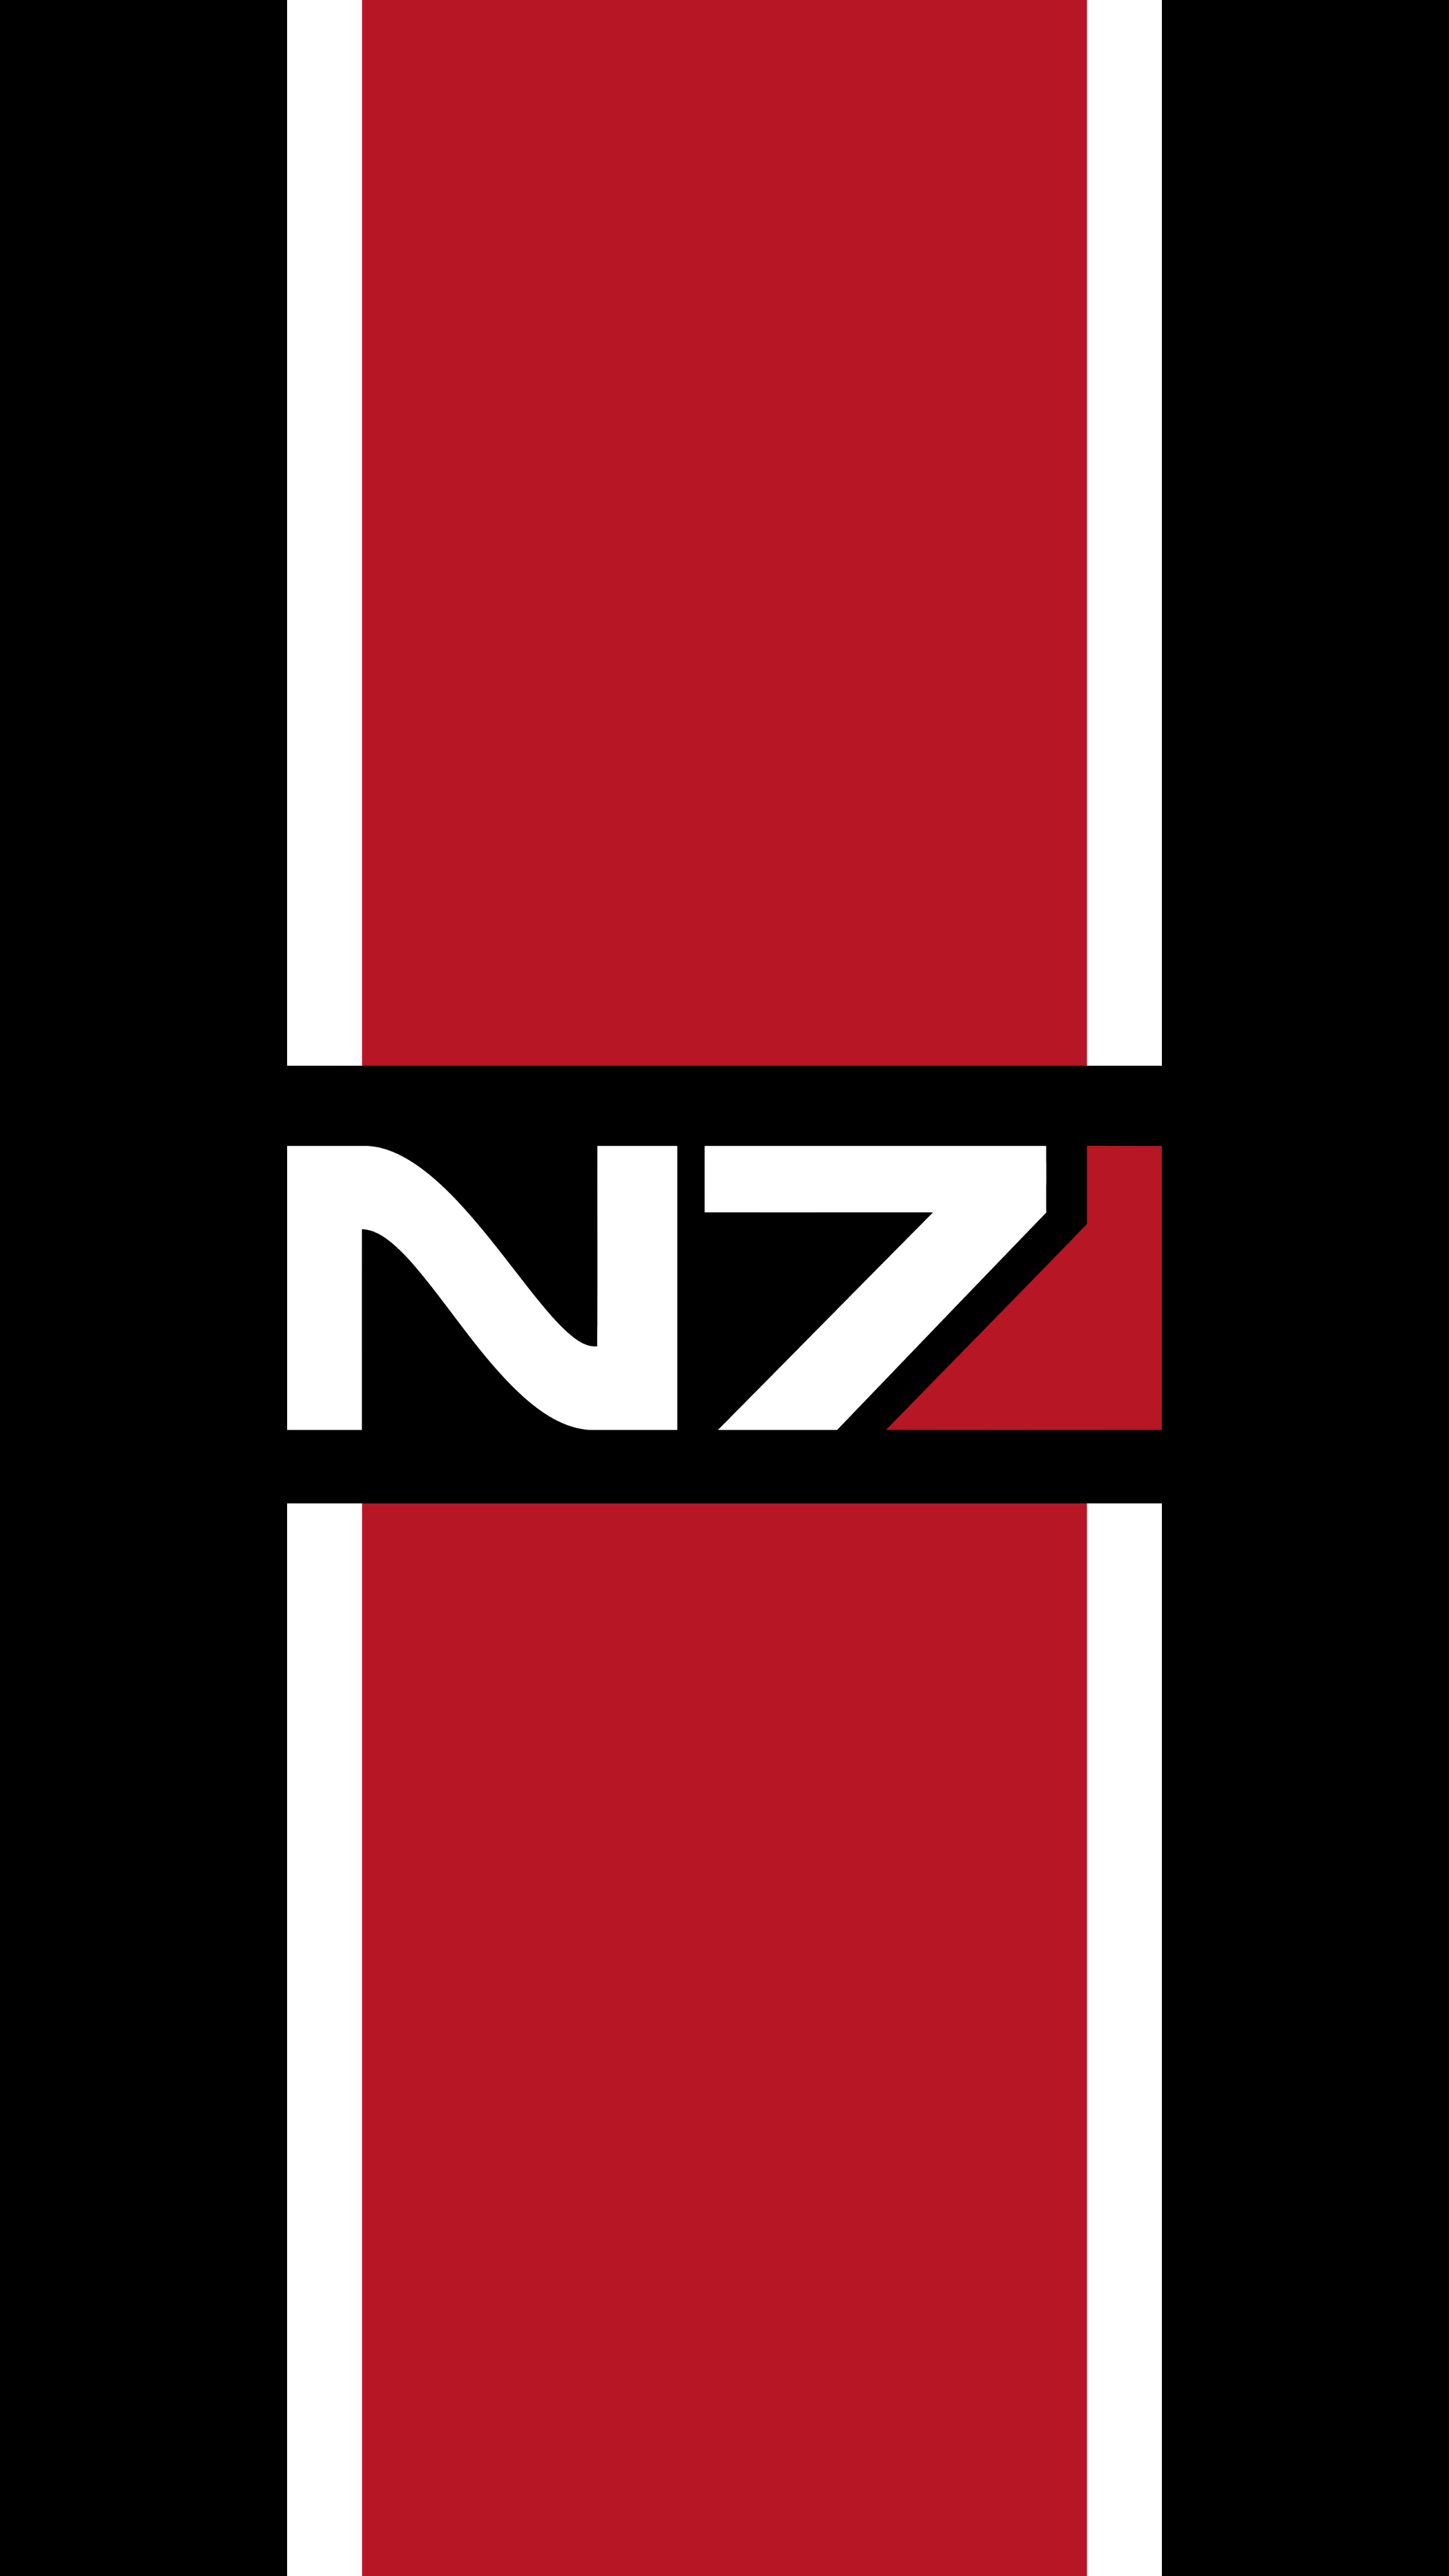 N7 Logo - N7 logo with stripes - Fulfilled Request [2160x3840] : Amoledbackgrounds